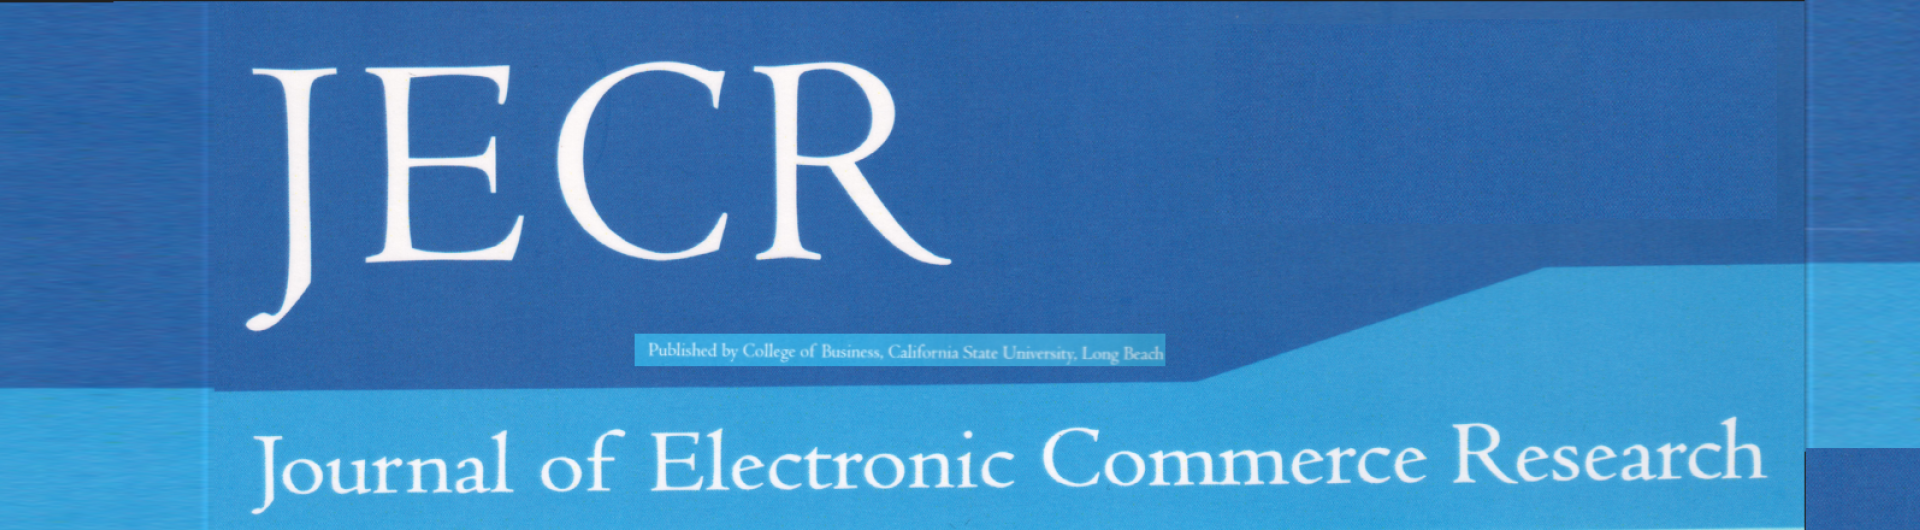 JERC Journal of Electronic Commerce Research CSULB College of Business